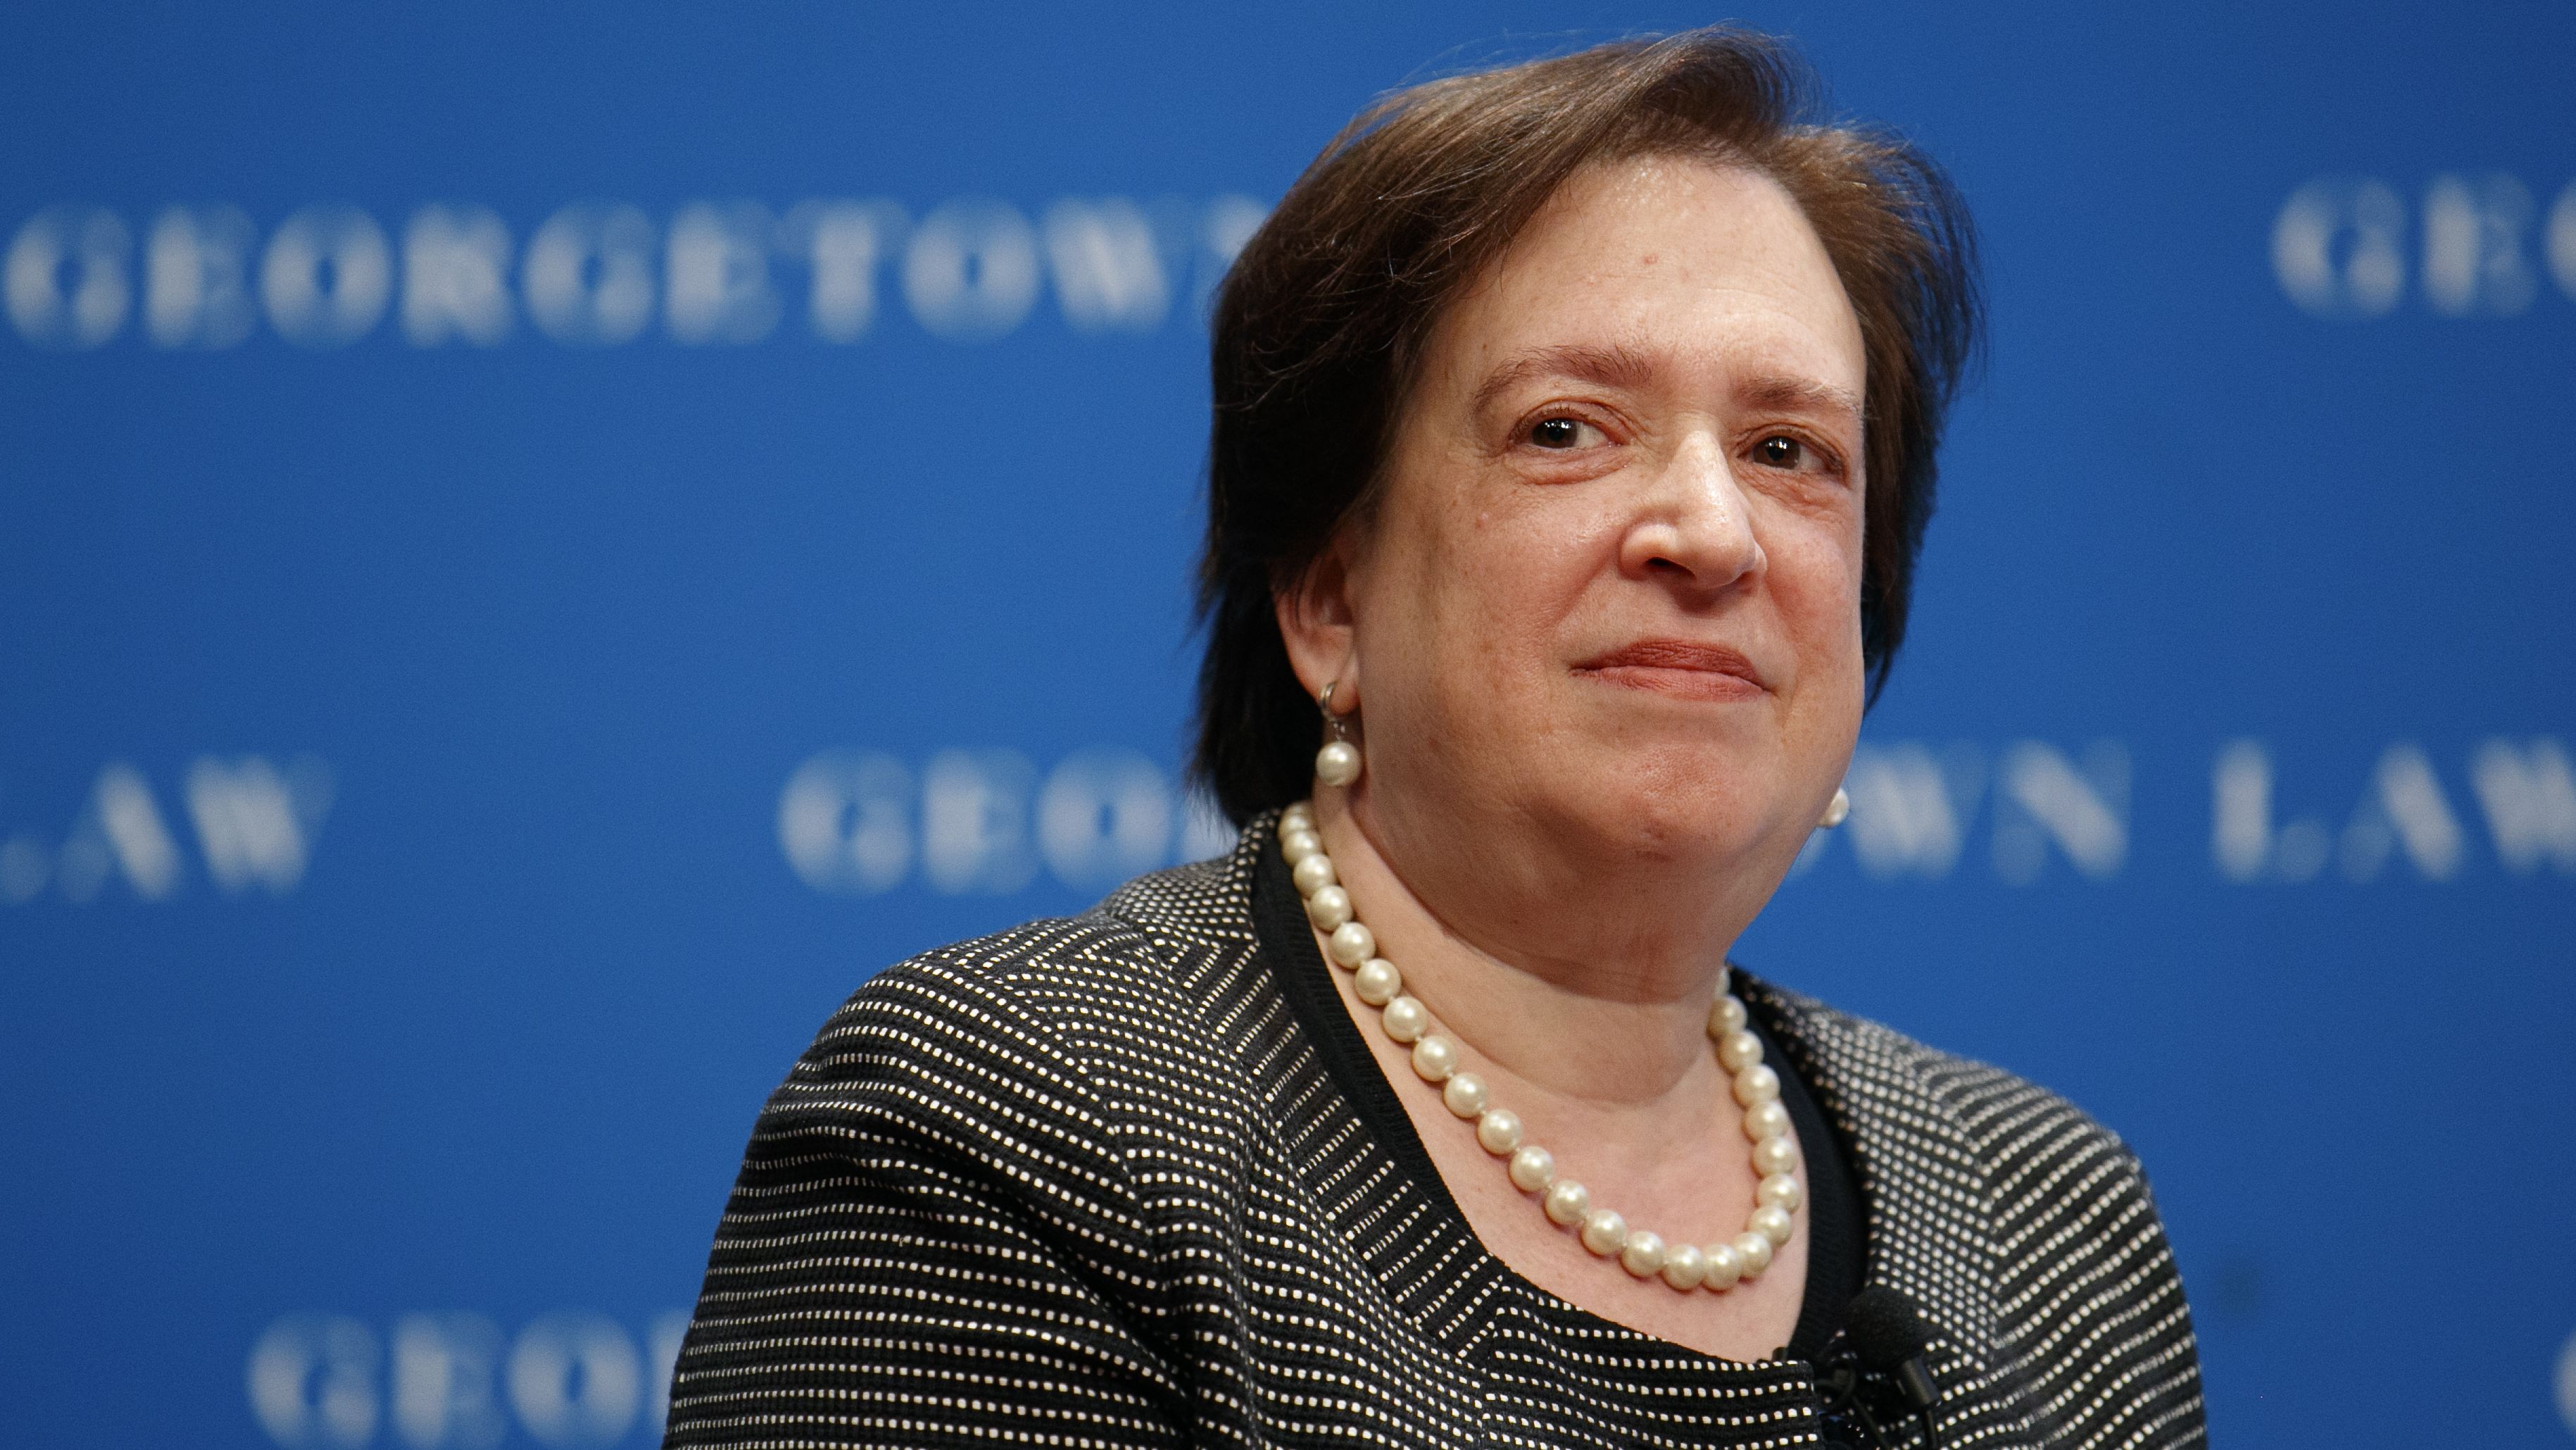 U.S. Supreme Court Justice Elena Kagan attends an event at Georgetown Law, Thursday, July 18, 2019, in Washington.